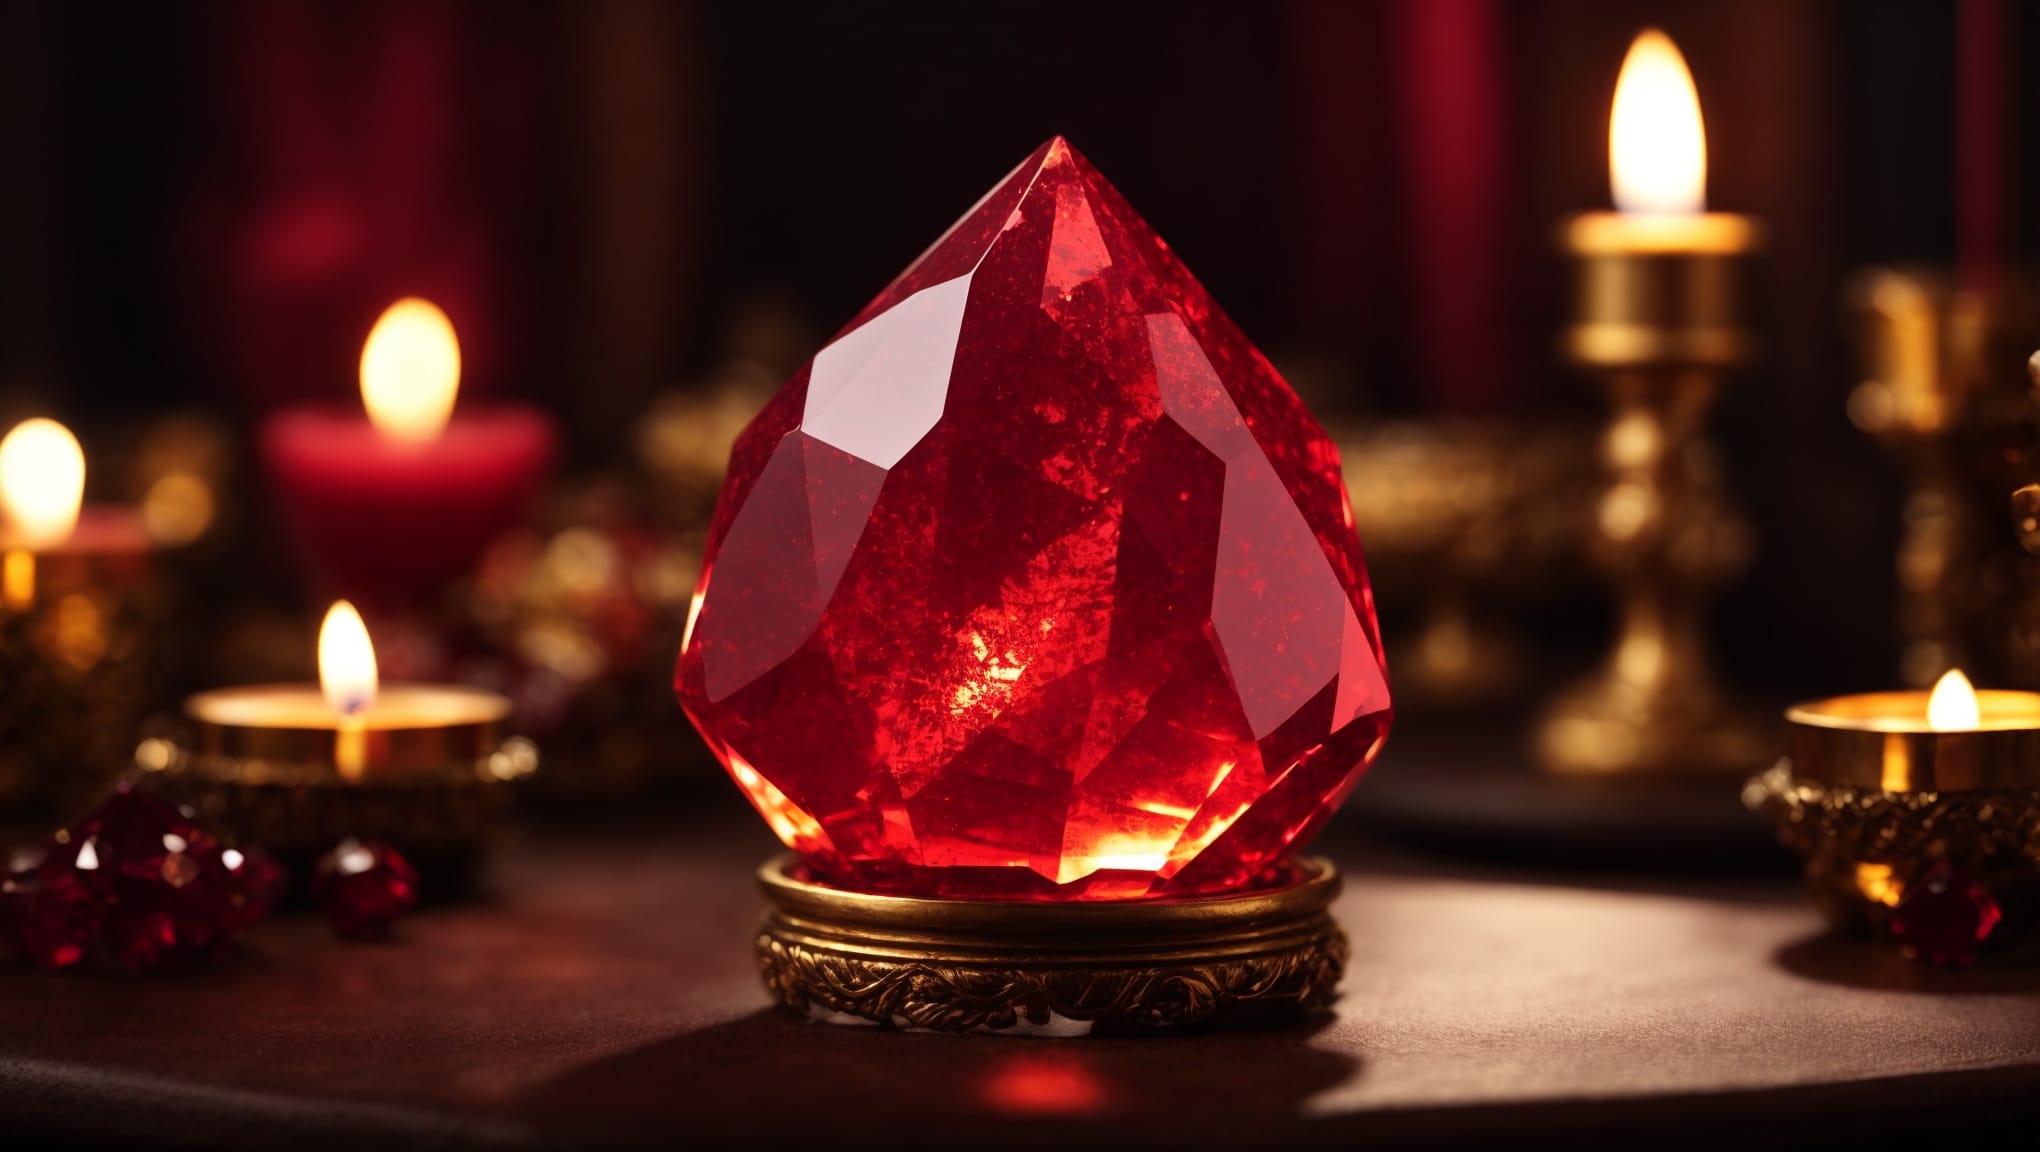 Deep red brilliance of Ruby properties